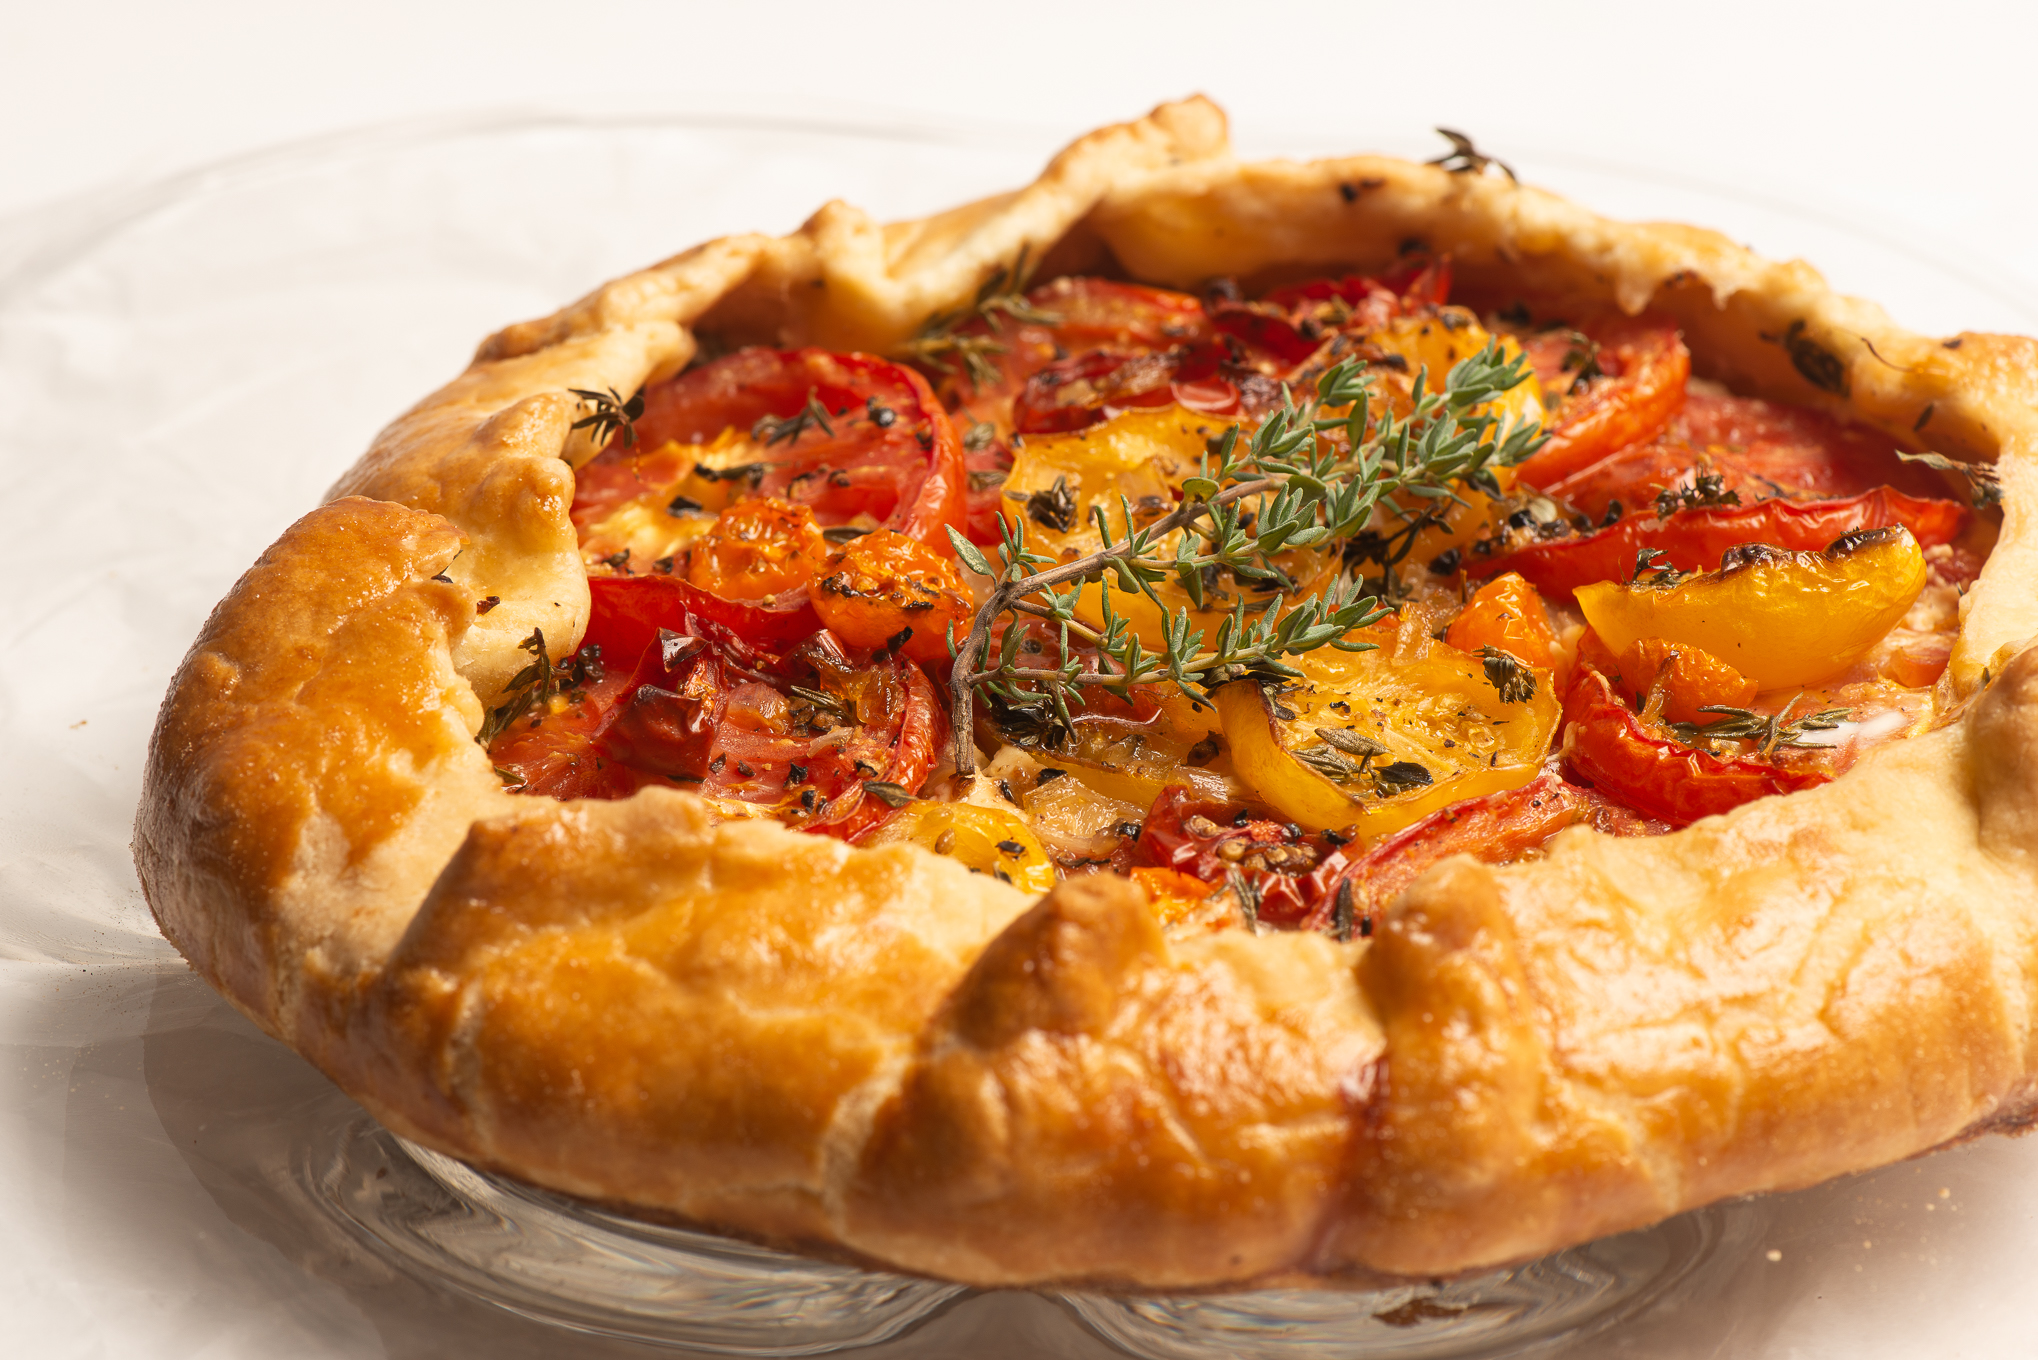 Oldies But Goodies: Tomato Galette With Honeyed Goat Cheese, Caramelized Shallots and Fresh Thyme